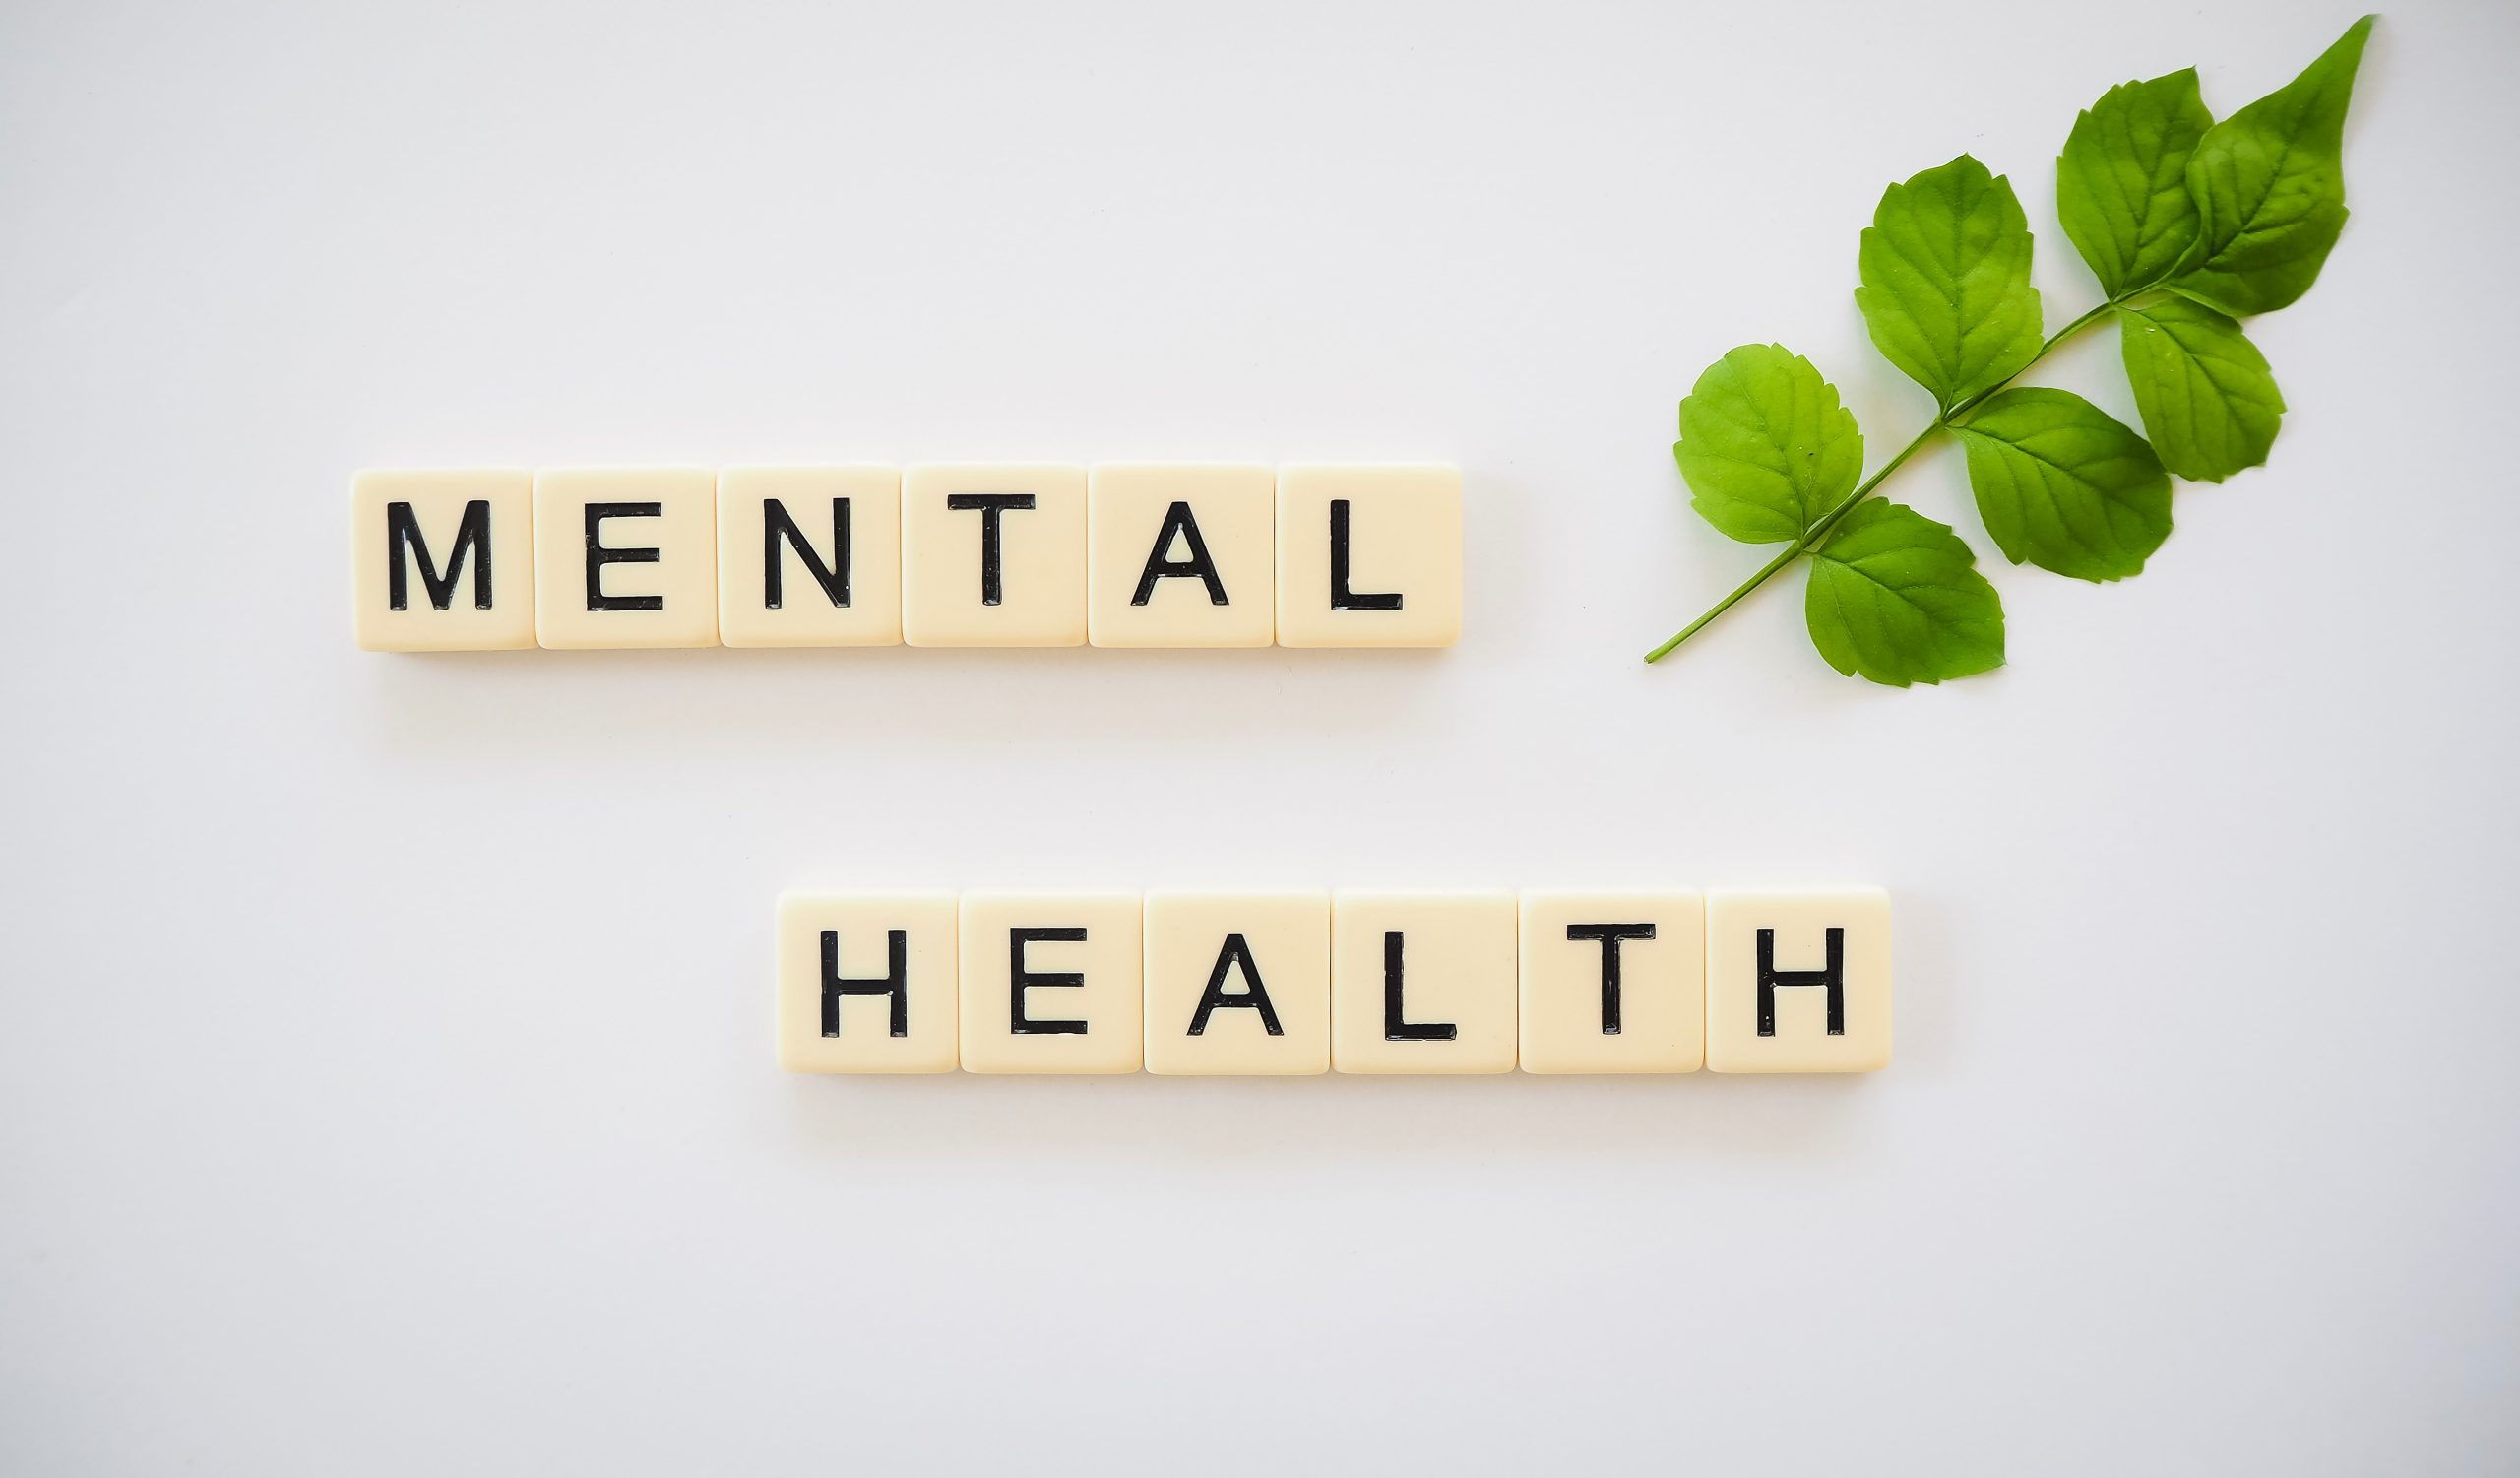 Mental Health During the COVID-19 Pandemic